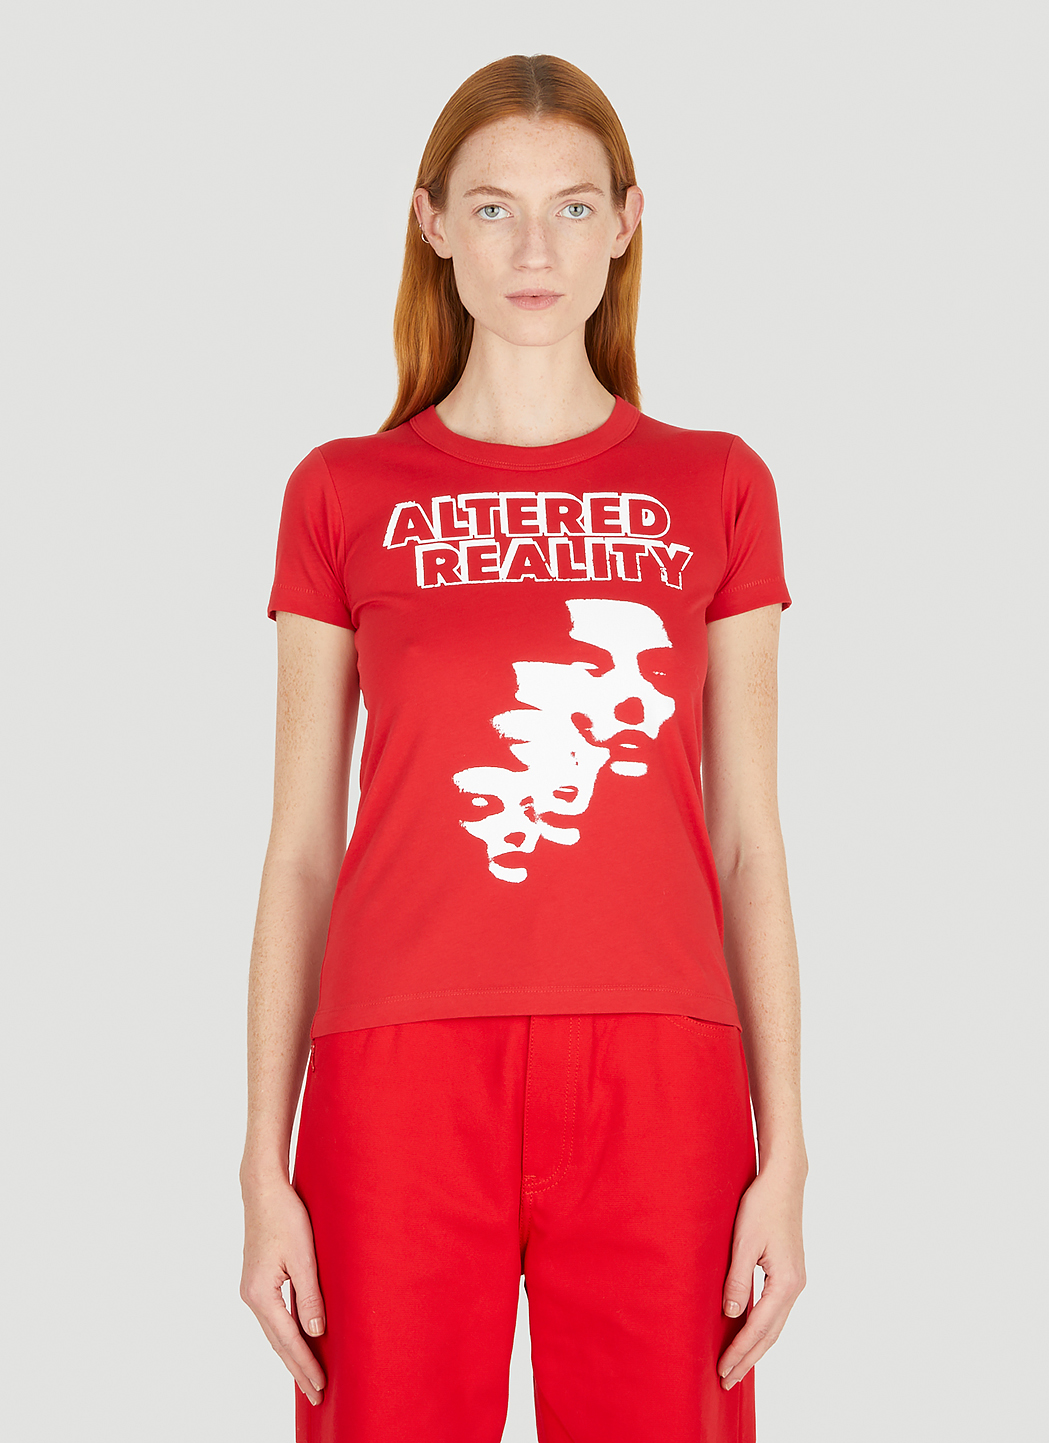 Altered Reality T-Shirt